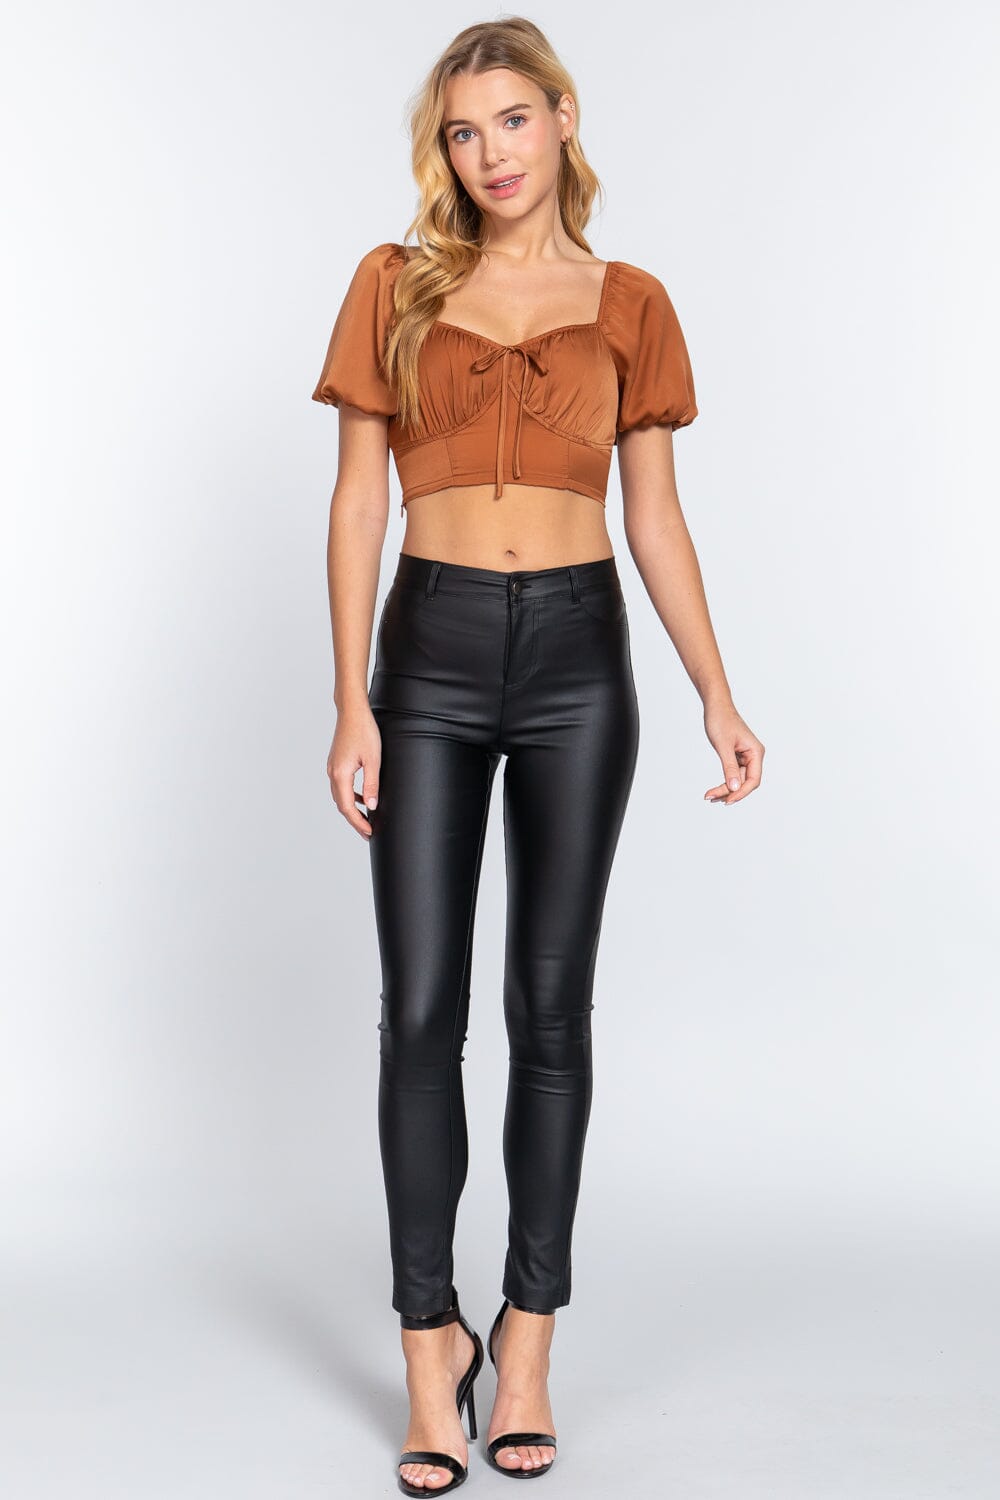 Rust Brown 3 Piece Tube Top Mini Skirt with Cardigan Sets – JeHouze.US